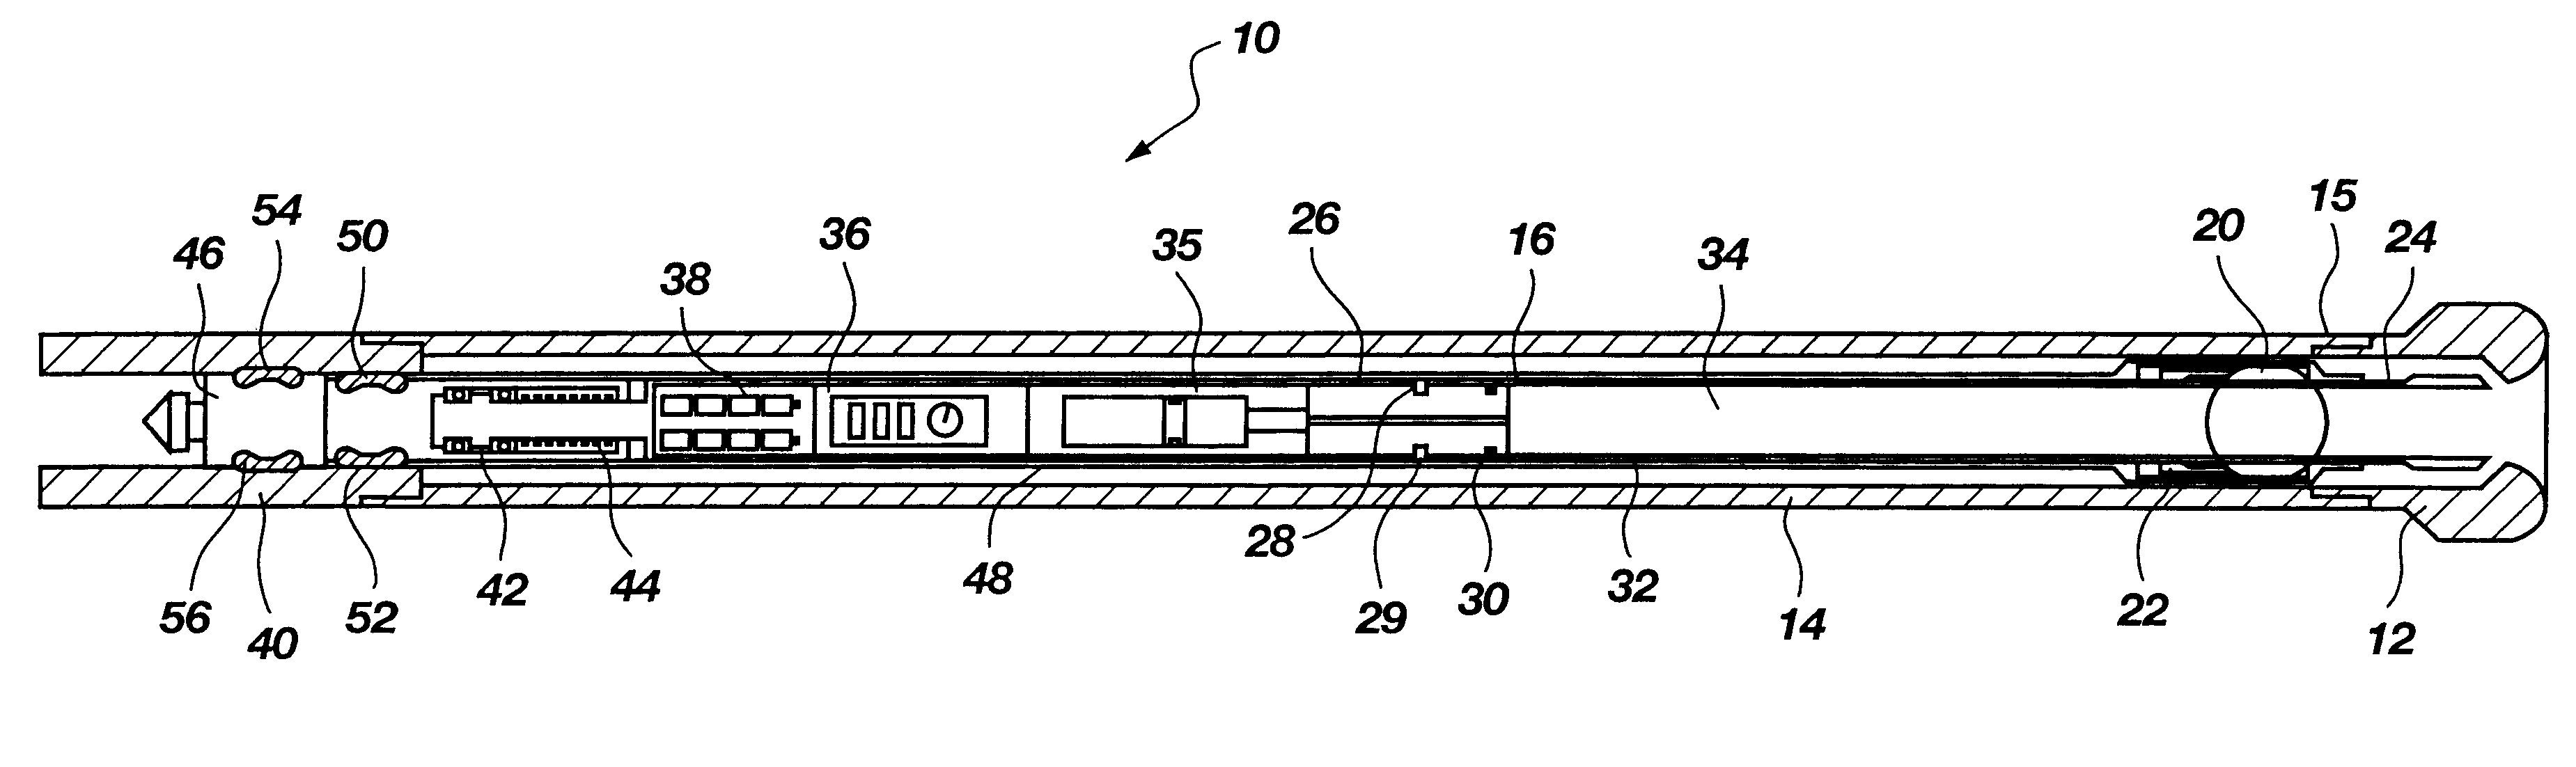 Apparatus for recovering core samples under pressure